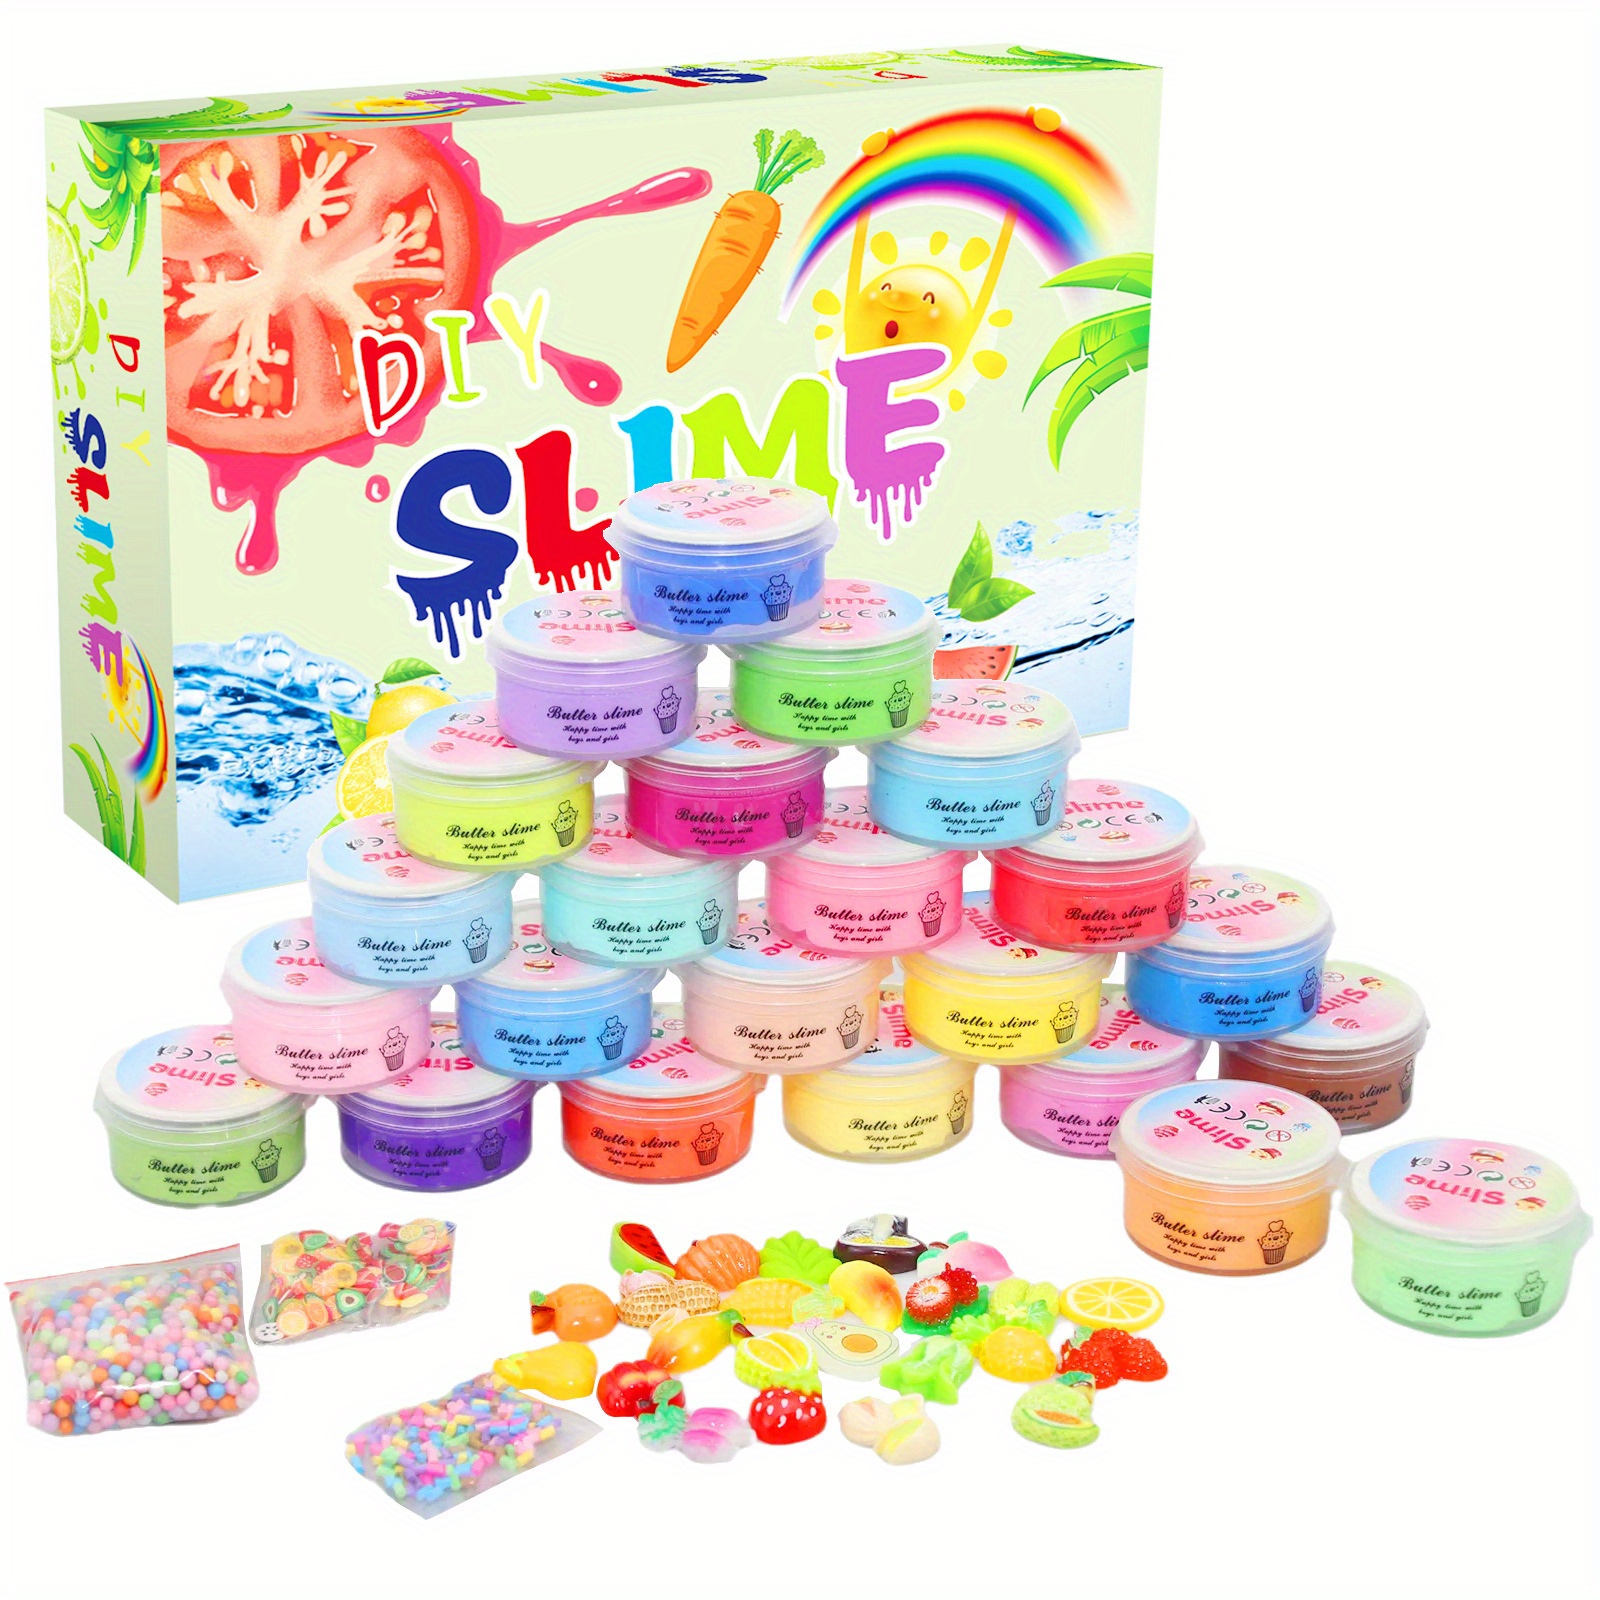 Kids Party Favors Foam Ball Slime Kit 150ml x4,Stress Relief Toys, Birthday  Gifts, Party Favors for Girl Boys 6 7 8 9 10 11 12